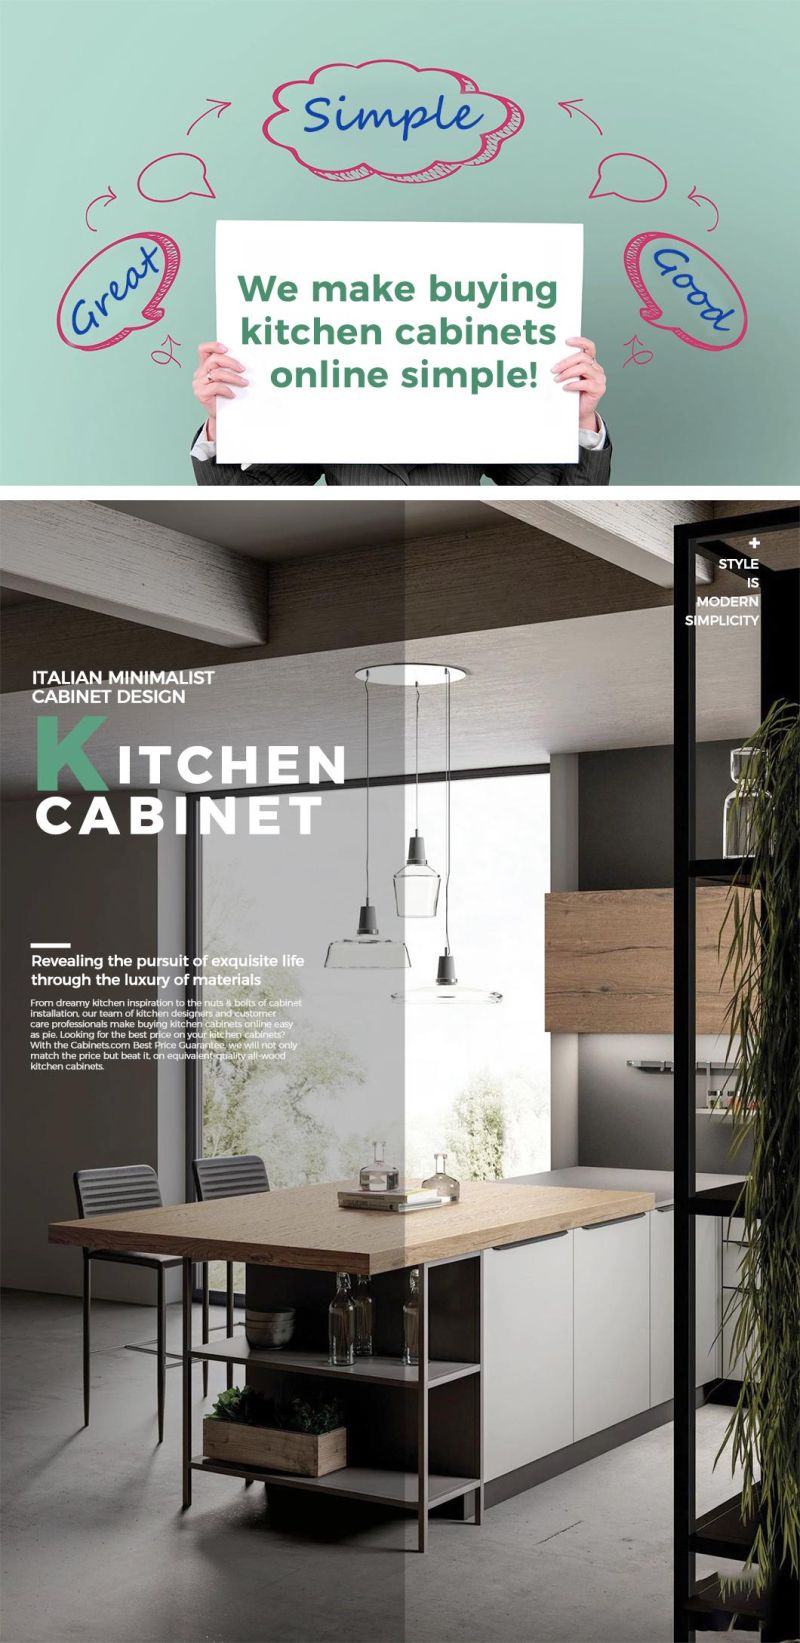 Apartment Kitchen Cabinet for Small Kitchen Room (KPE13)